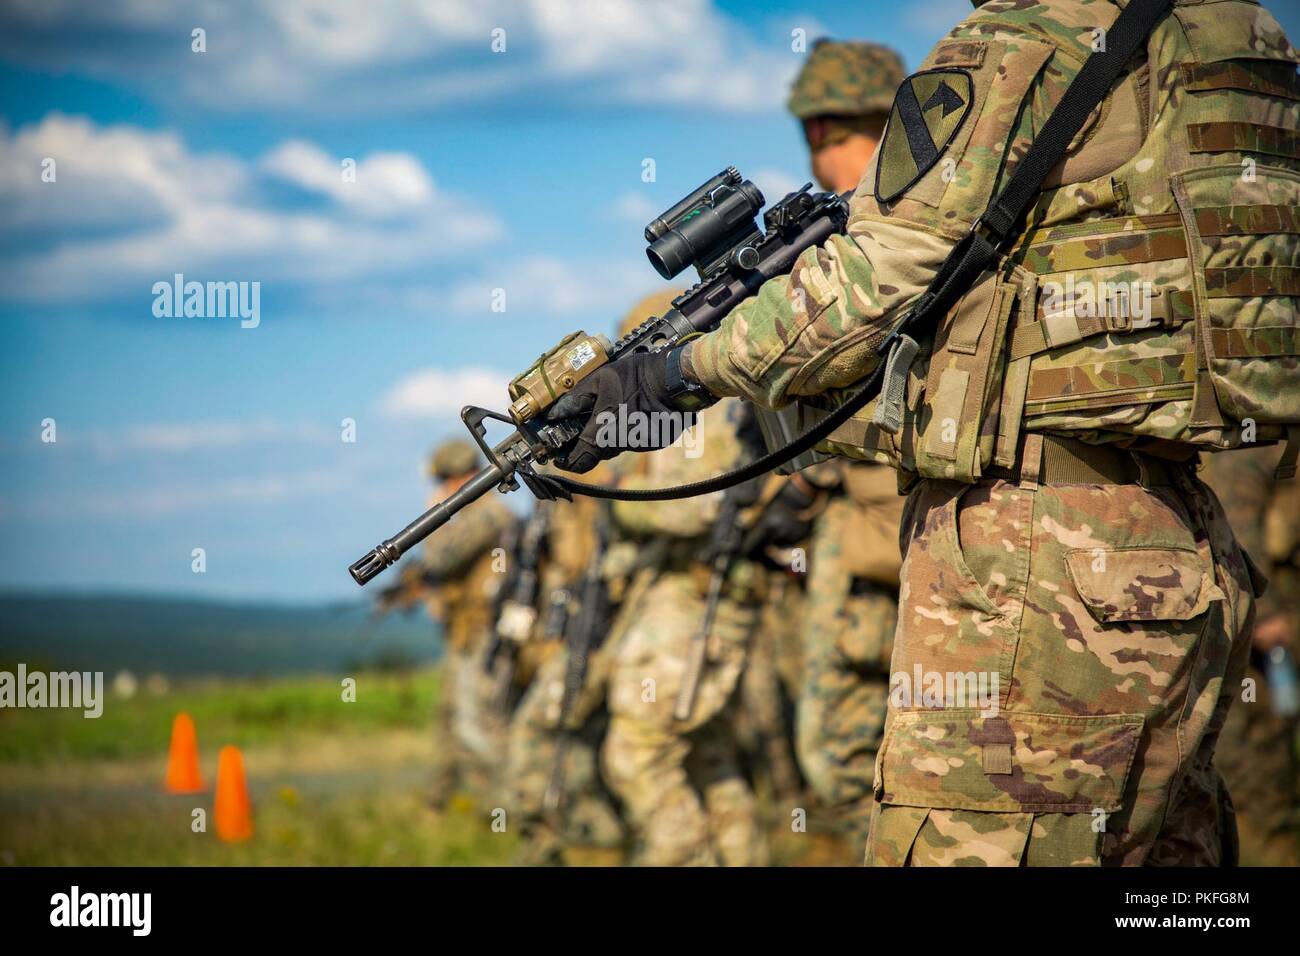 U.S. Marines with Black Sea Rotational Force 18.1 and U.S. Army soldiers execute an advanced portion of a Combat Marksmanship Program range during Exercise Platinum Lion 18 at Novo Selo Training Area, Bulgaria, Aug. 5, 2018. Platinum Lion is an annual field training exercise that reinforces relationships in a joint training environment, builds understanding of partner nation tactics, techniques and procedures, and increases interoperability with Allied and partner forces. Stock Photo